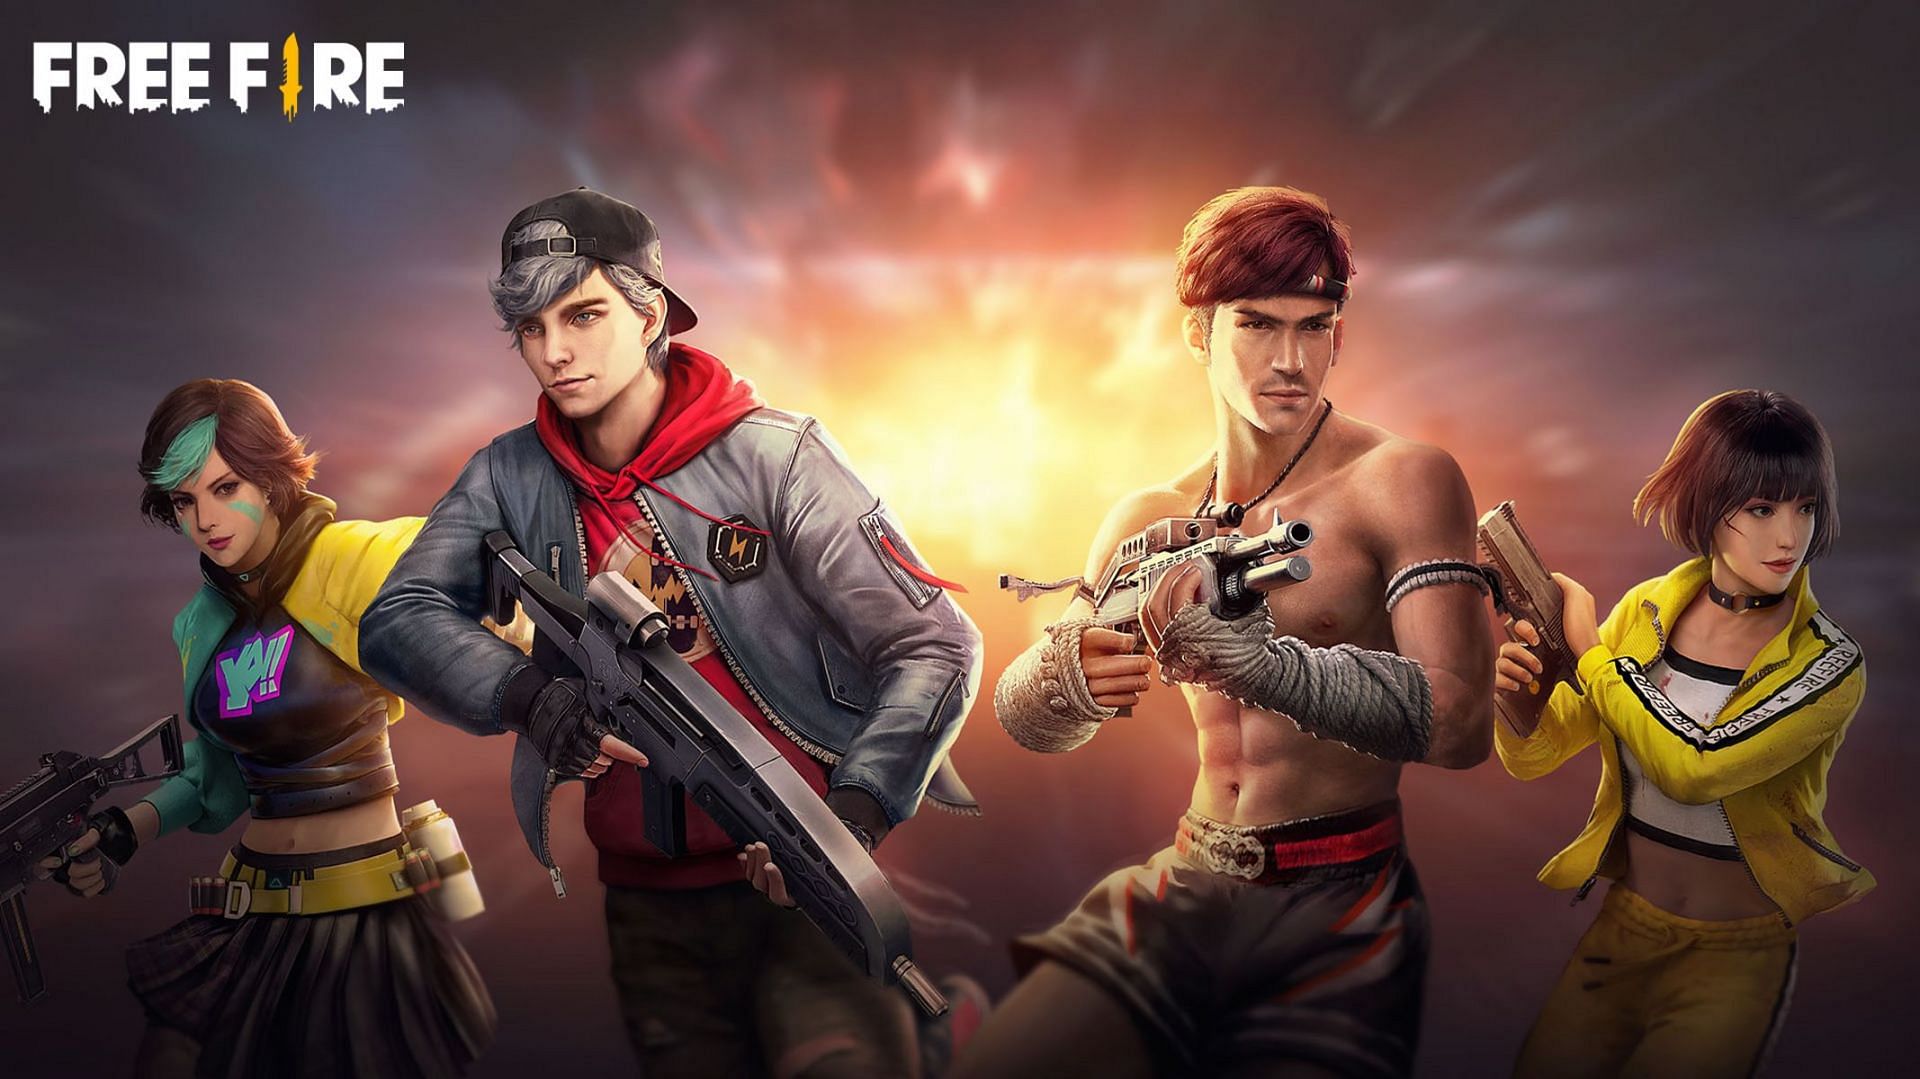 There have been rumors regarding Free Fire being a Chinese app (Image via Garena)